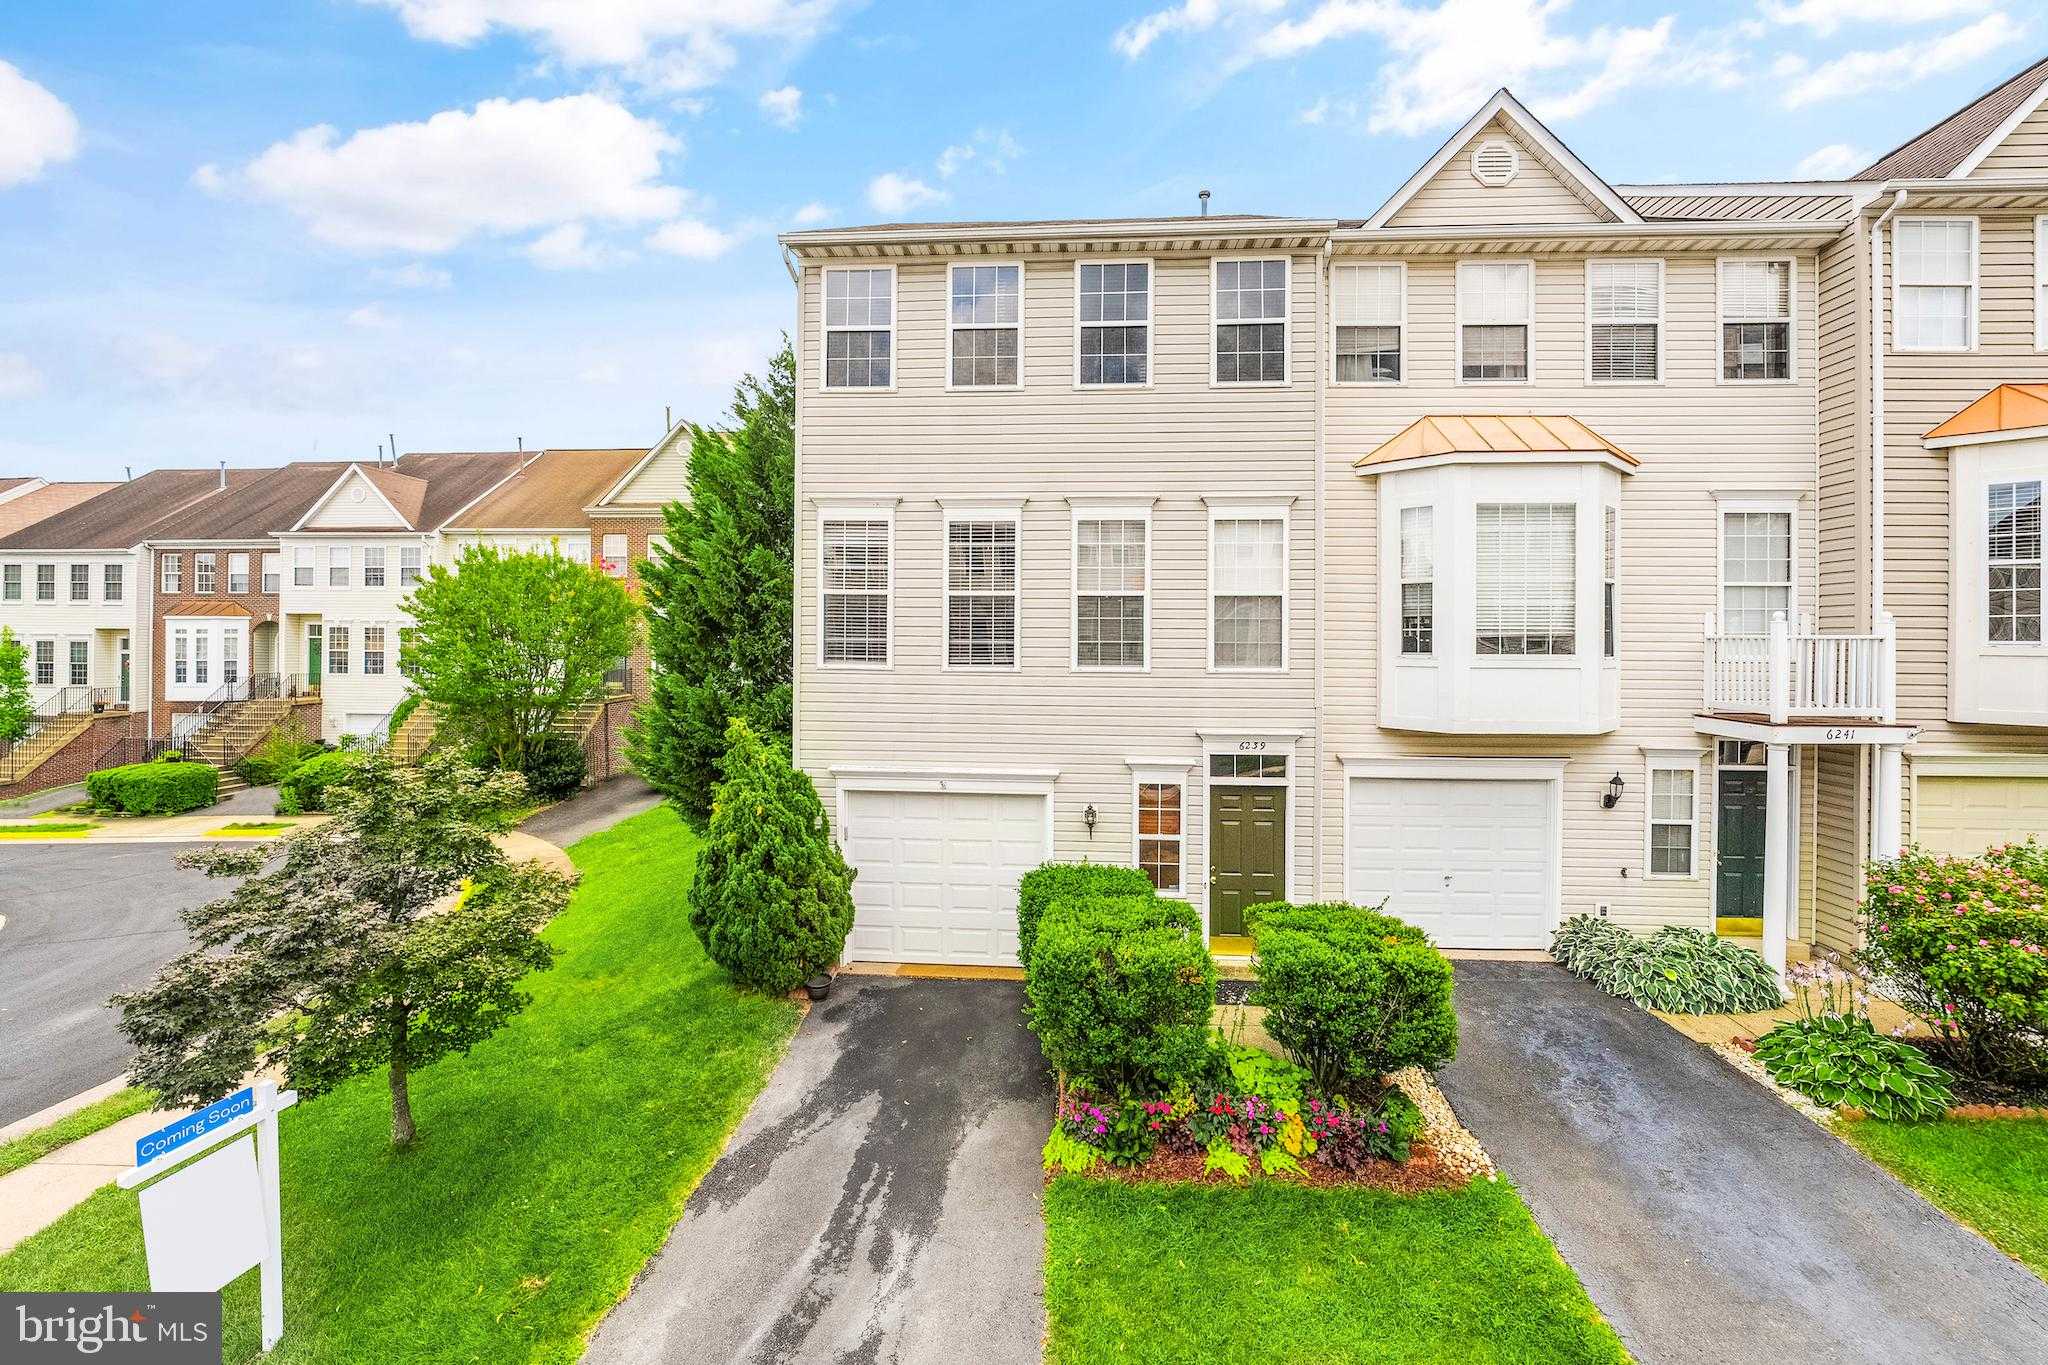 View CENTREVILLE, VA 20120 townhome